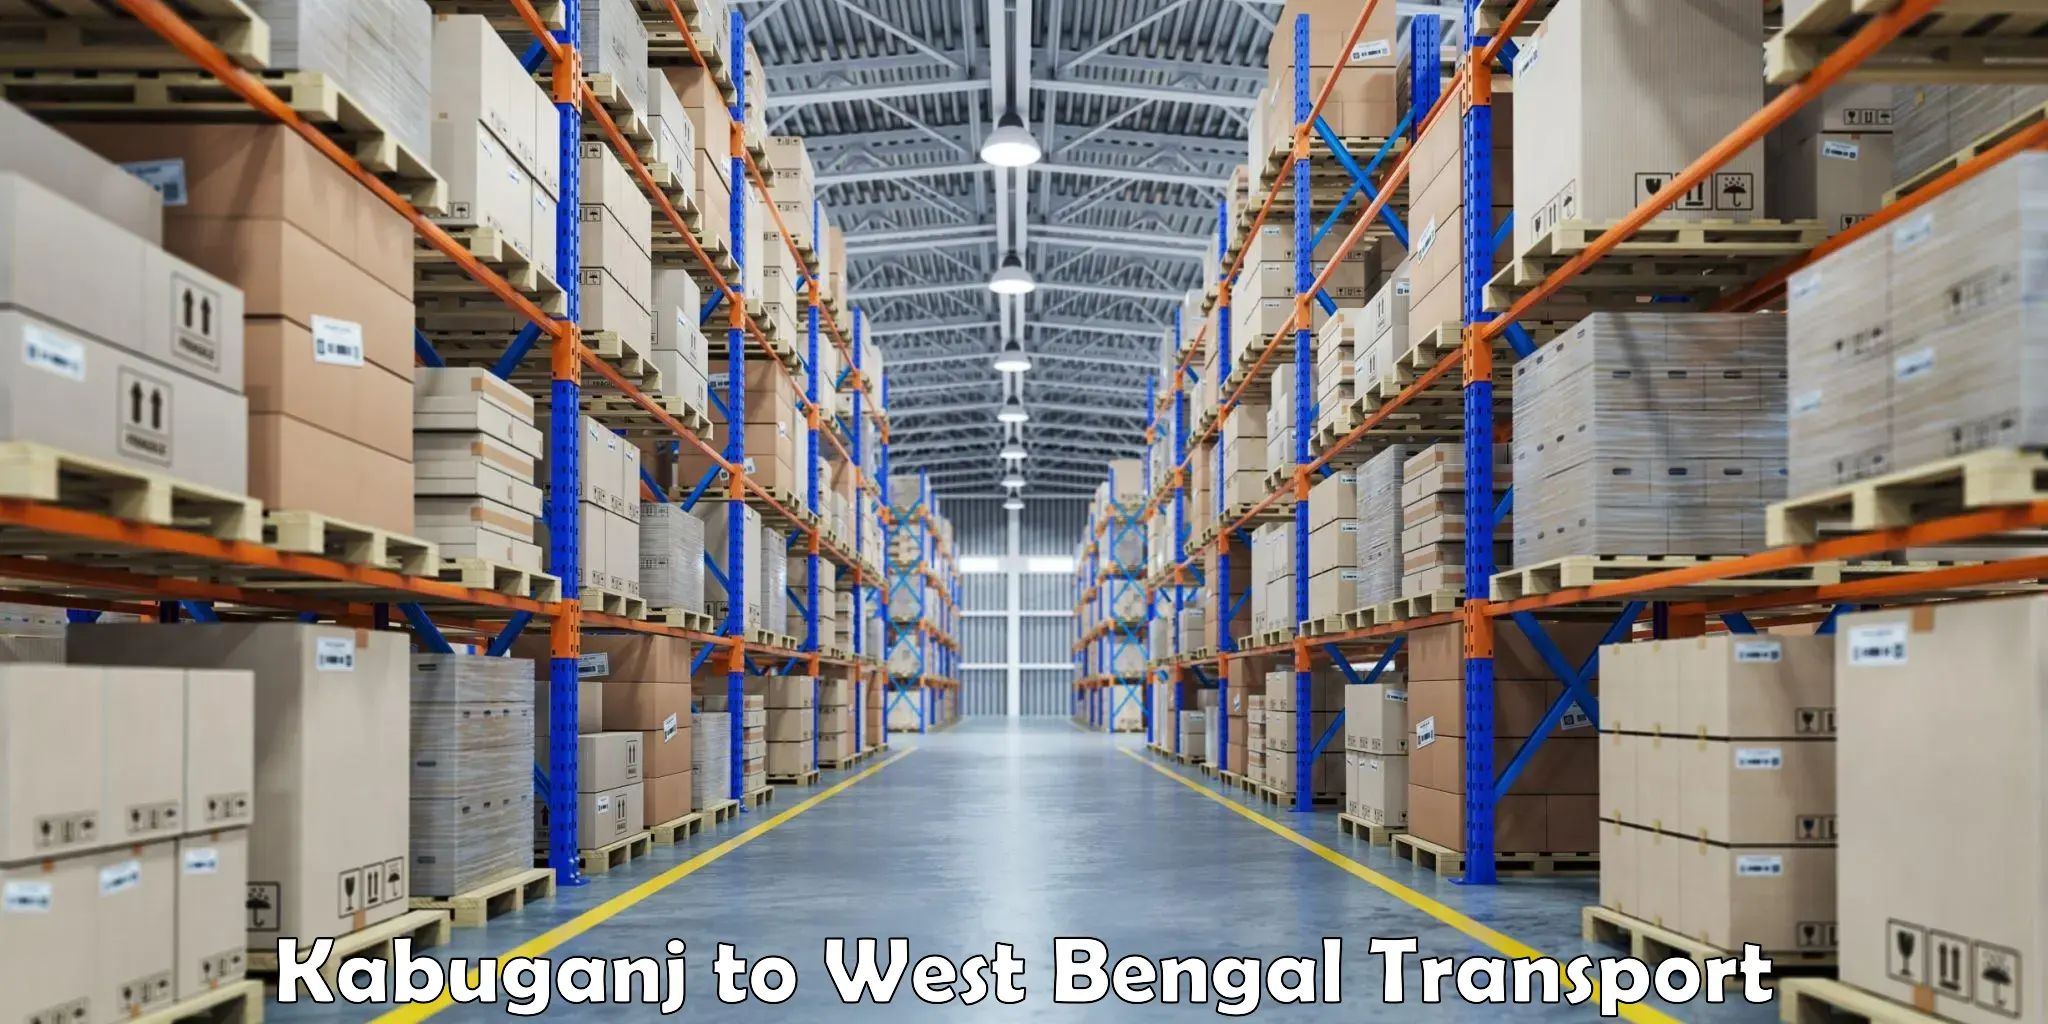 Air freight transport services in Kabuganj to Morgram